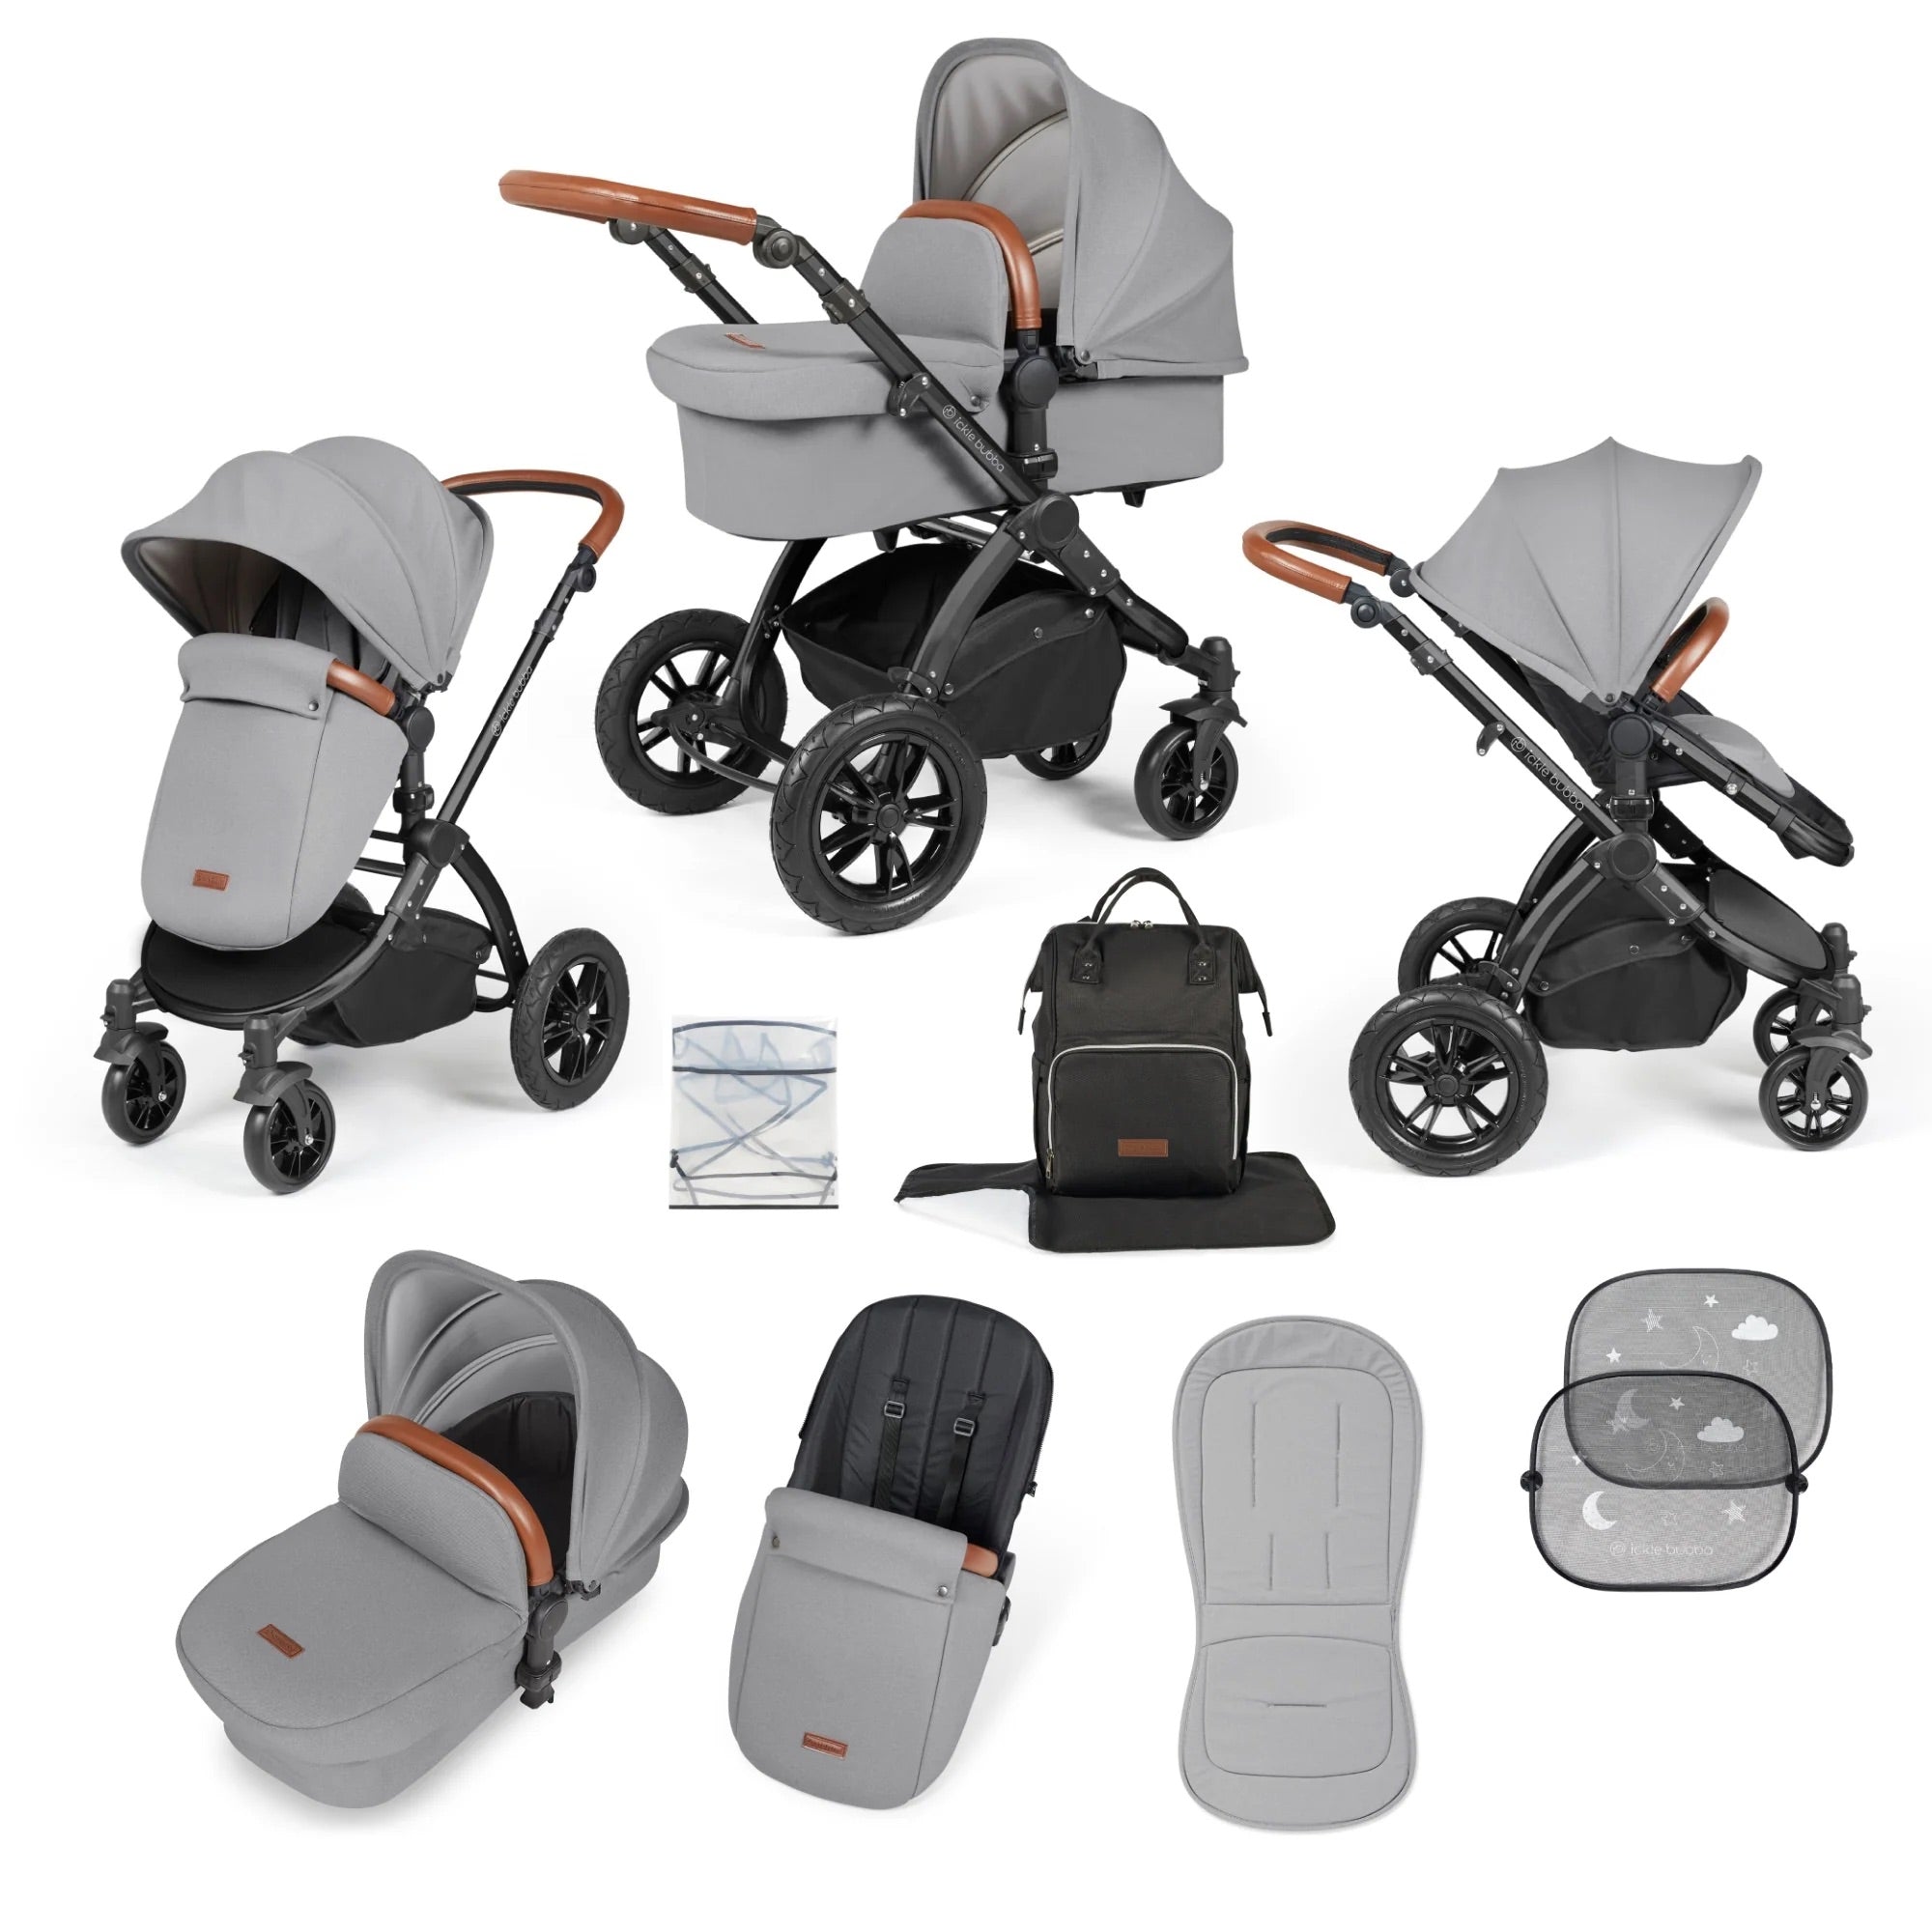 Ickle Bubba Stomp Luxe 2 in 1 Pushchair - Black / Pearl Grey / Tan   